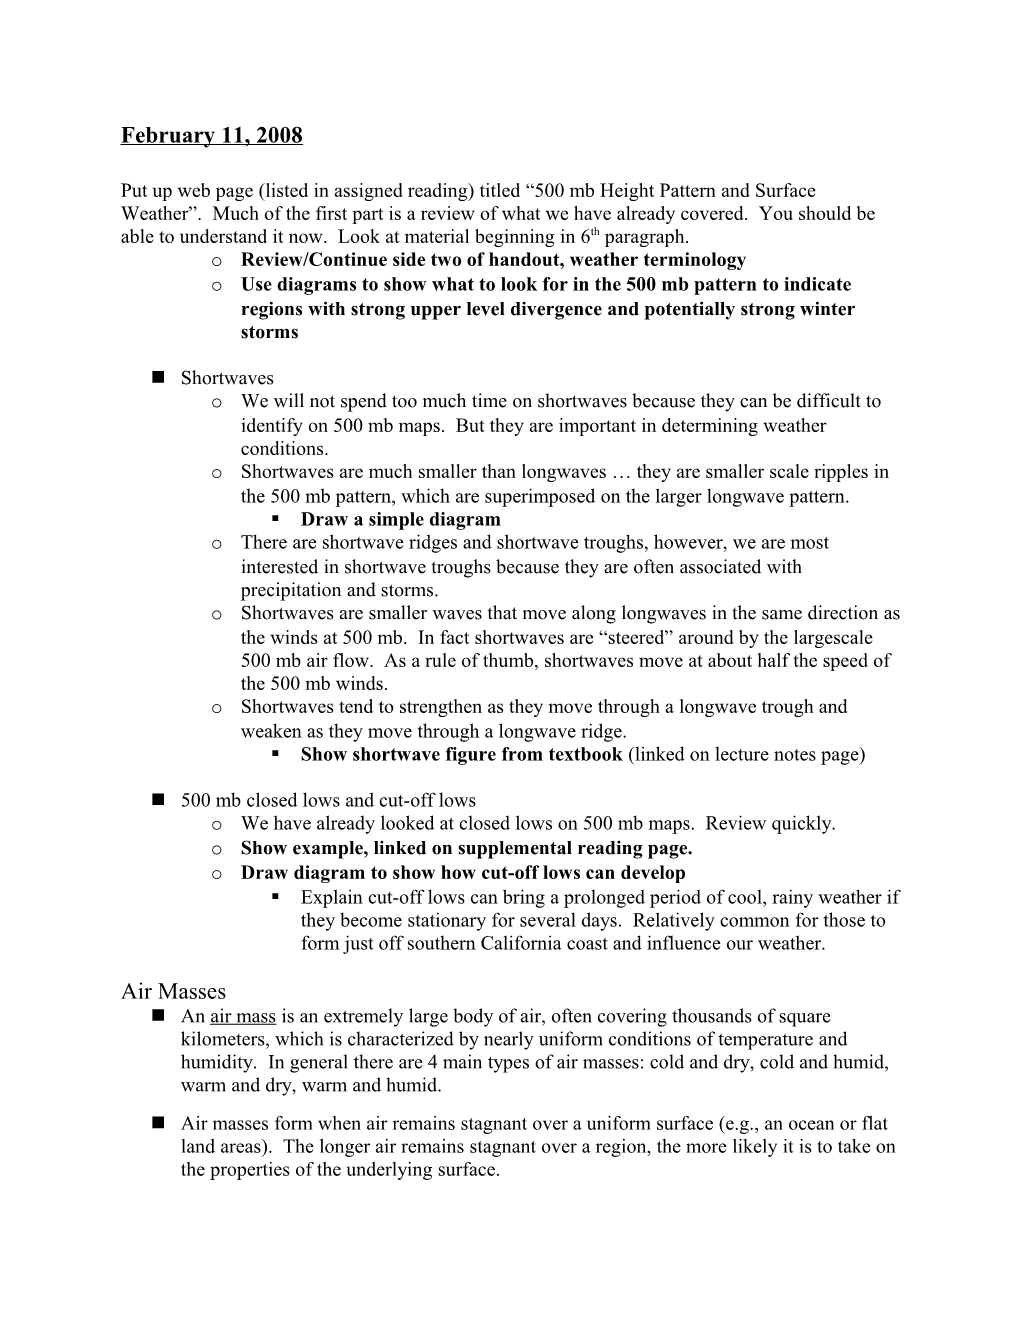 O Review/Continue Side Two of Handout, Weather Terminology